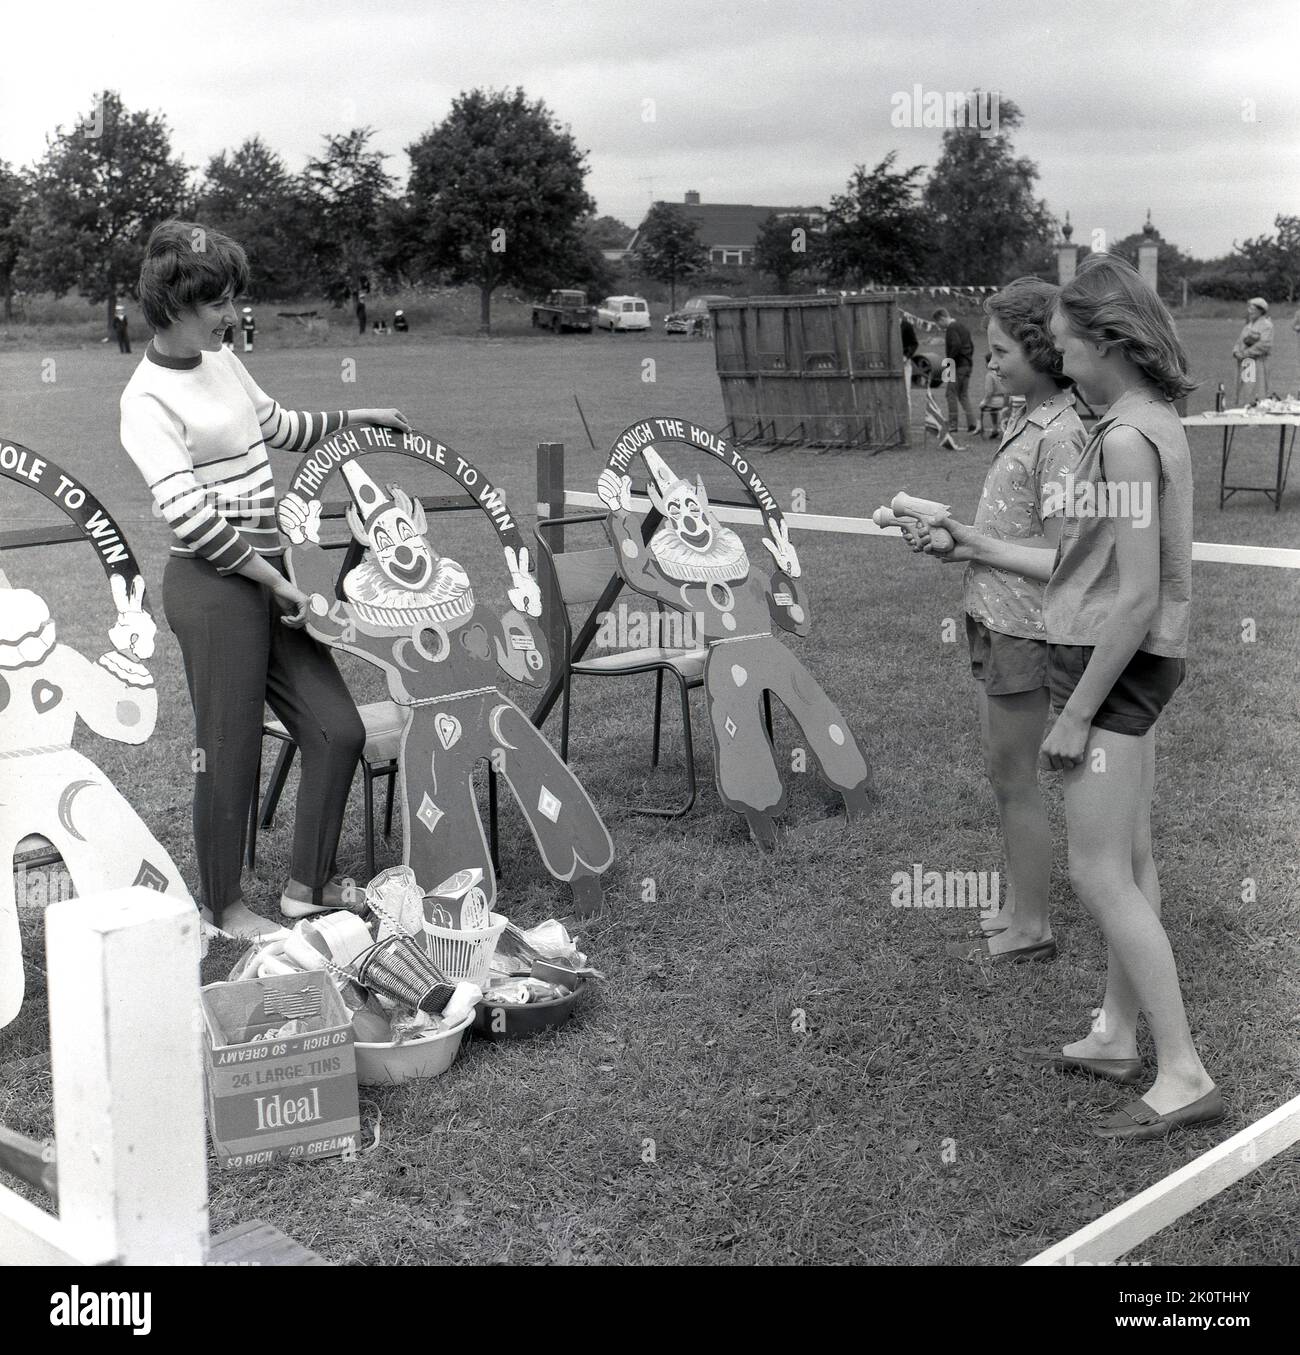 1964, historical, English village fete, outside in a field two girls playing a game, 'Through The Hole To Win', Stone, Buckinghamshire, England, UK. Stock Photo